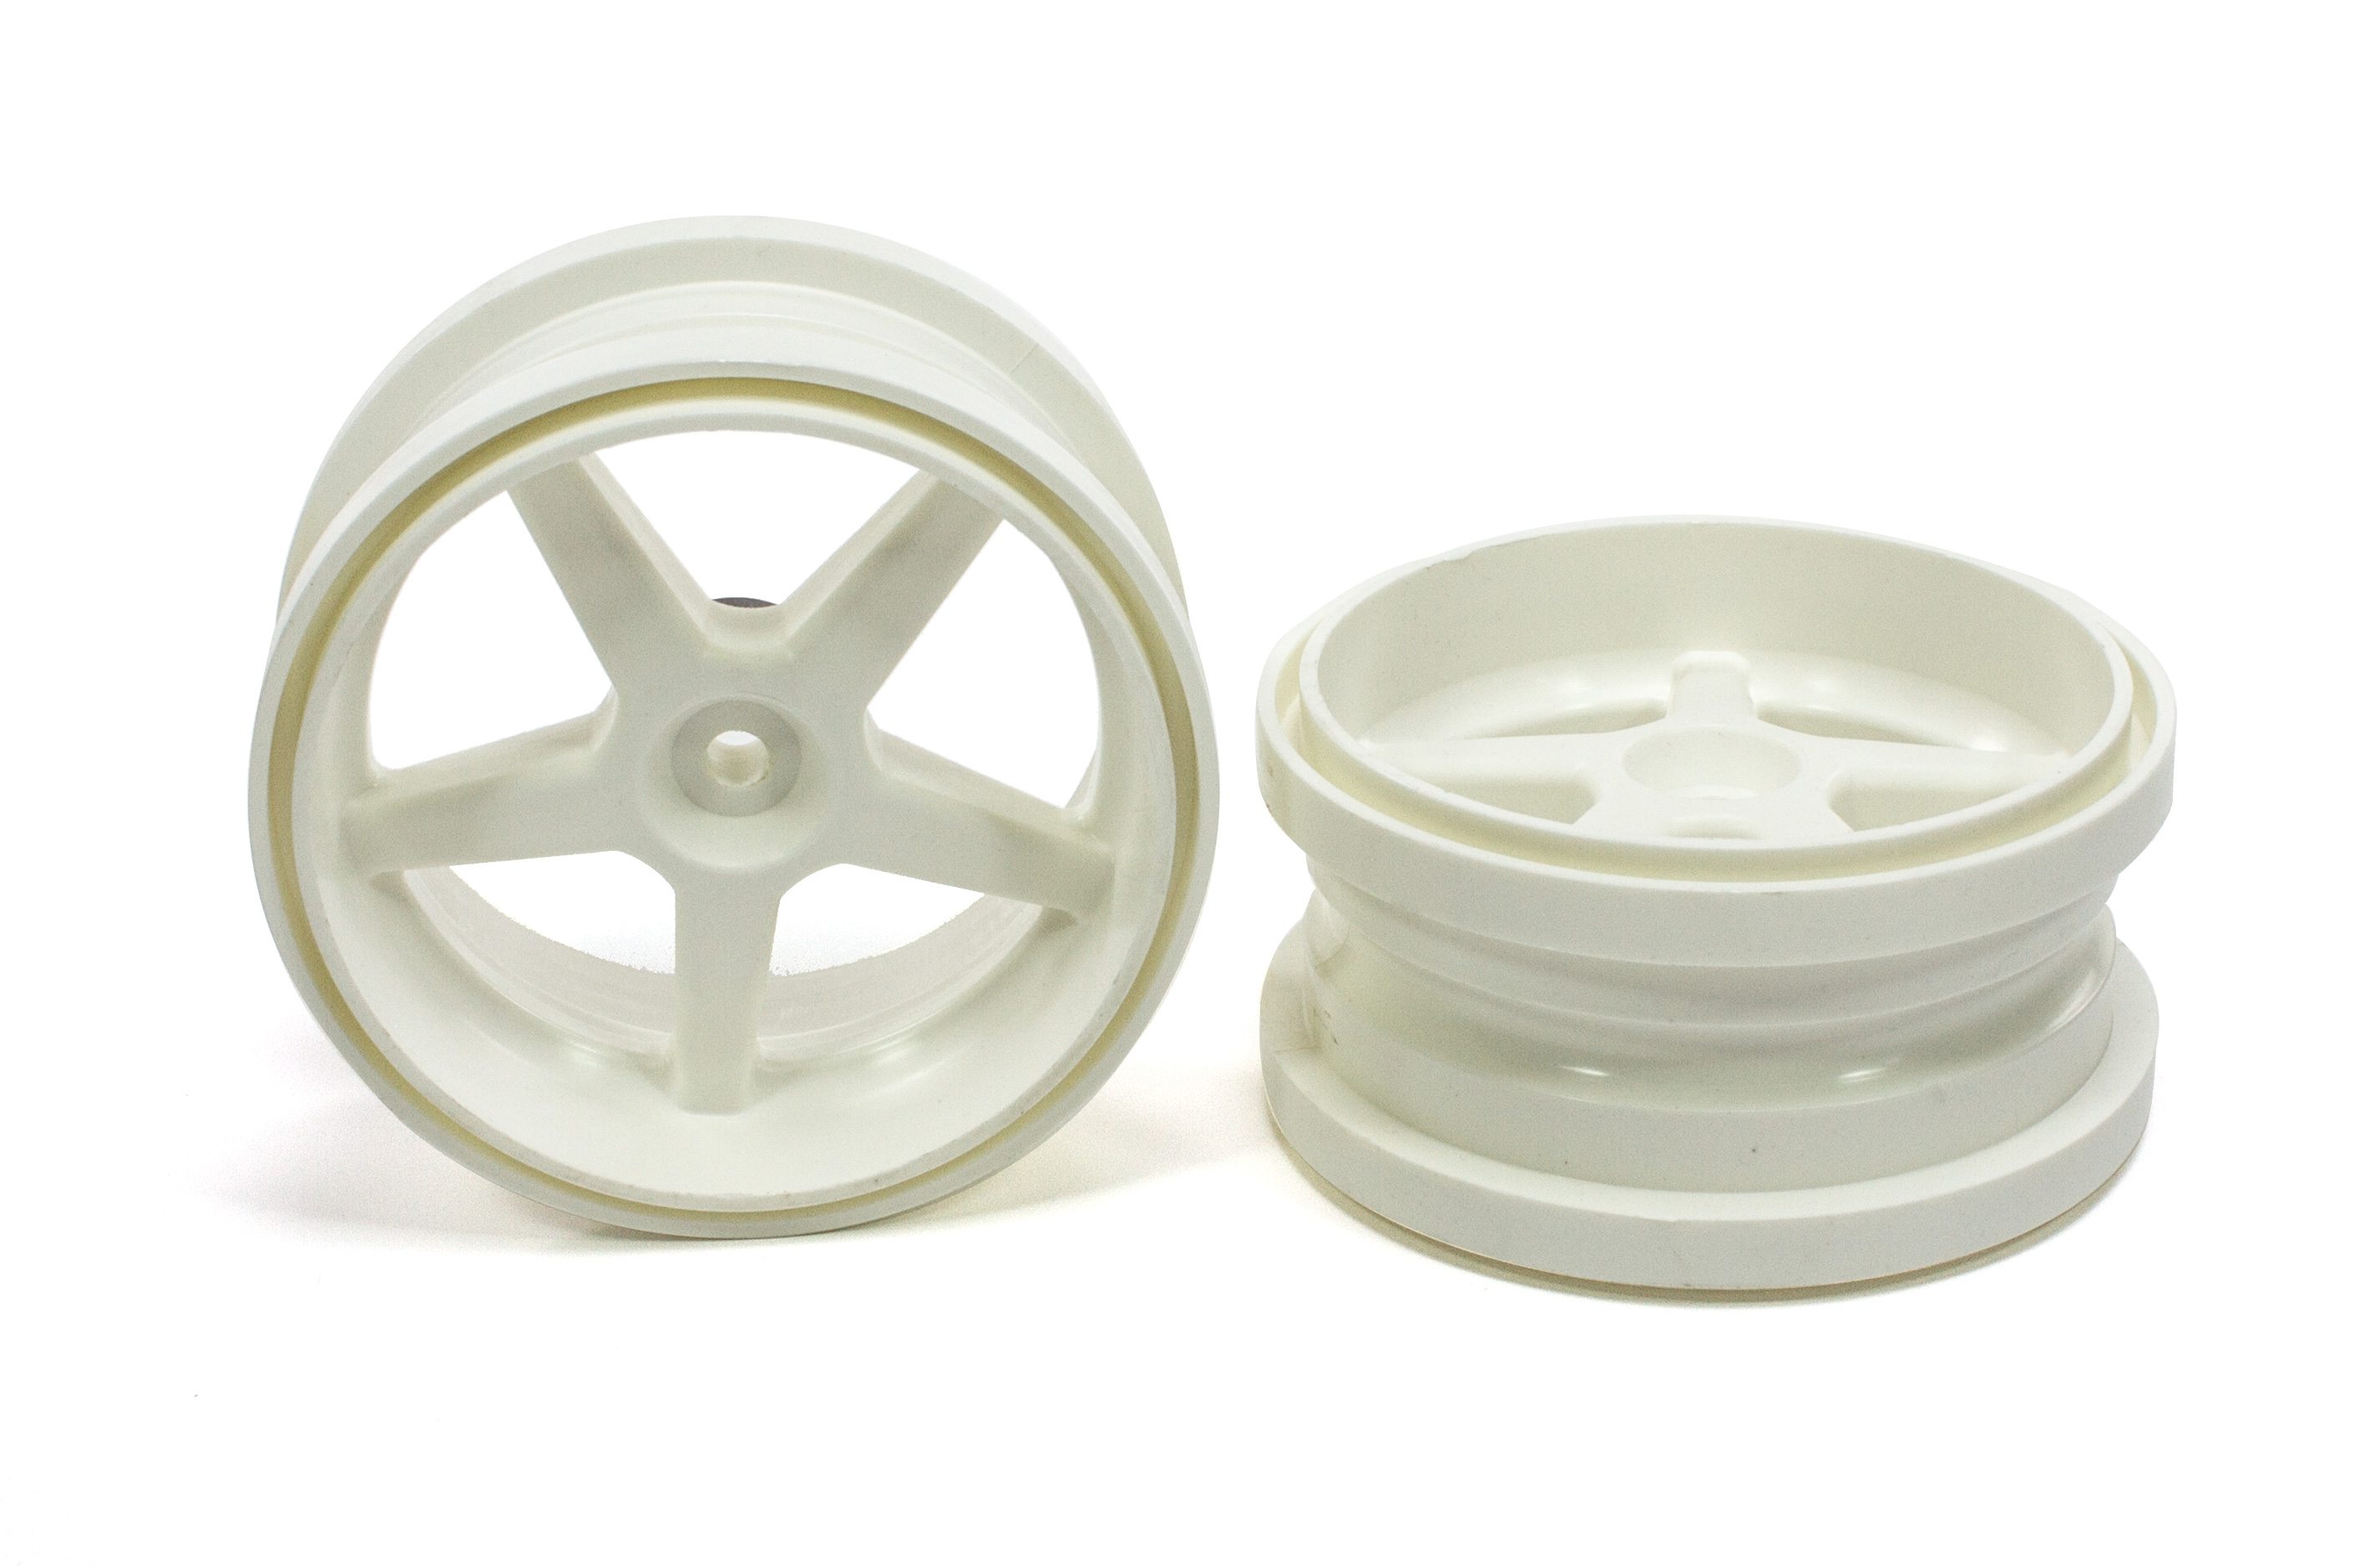 6105/01 FG Widened rim 1:6 white, with reinforcement ring